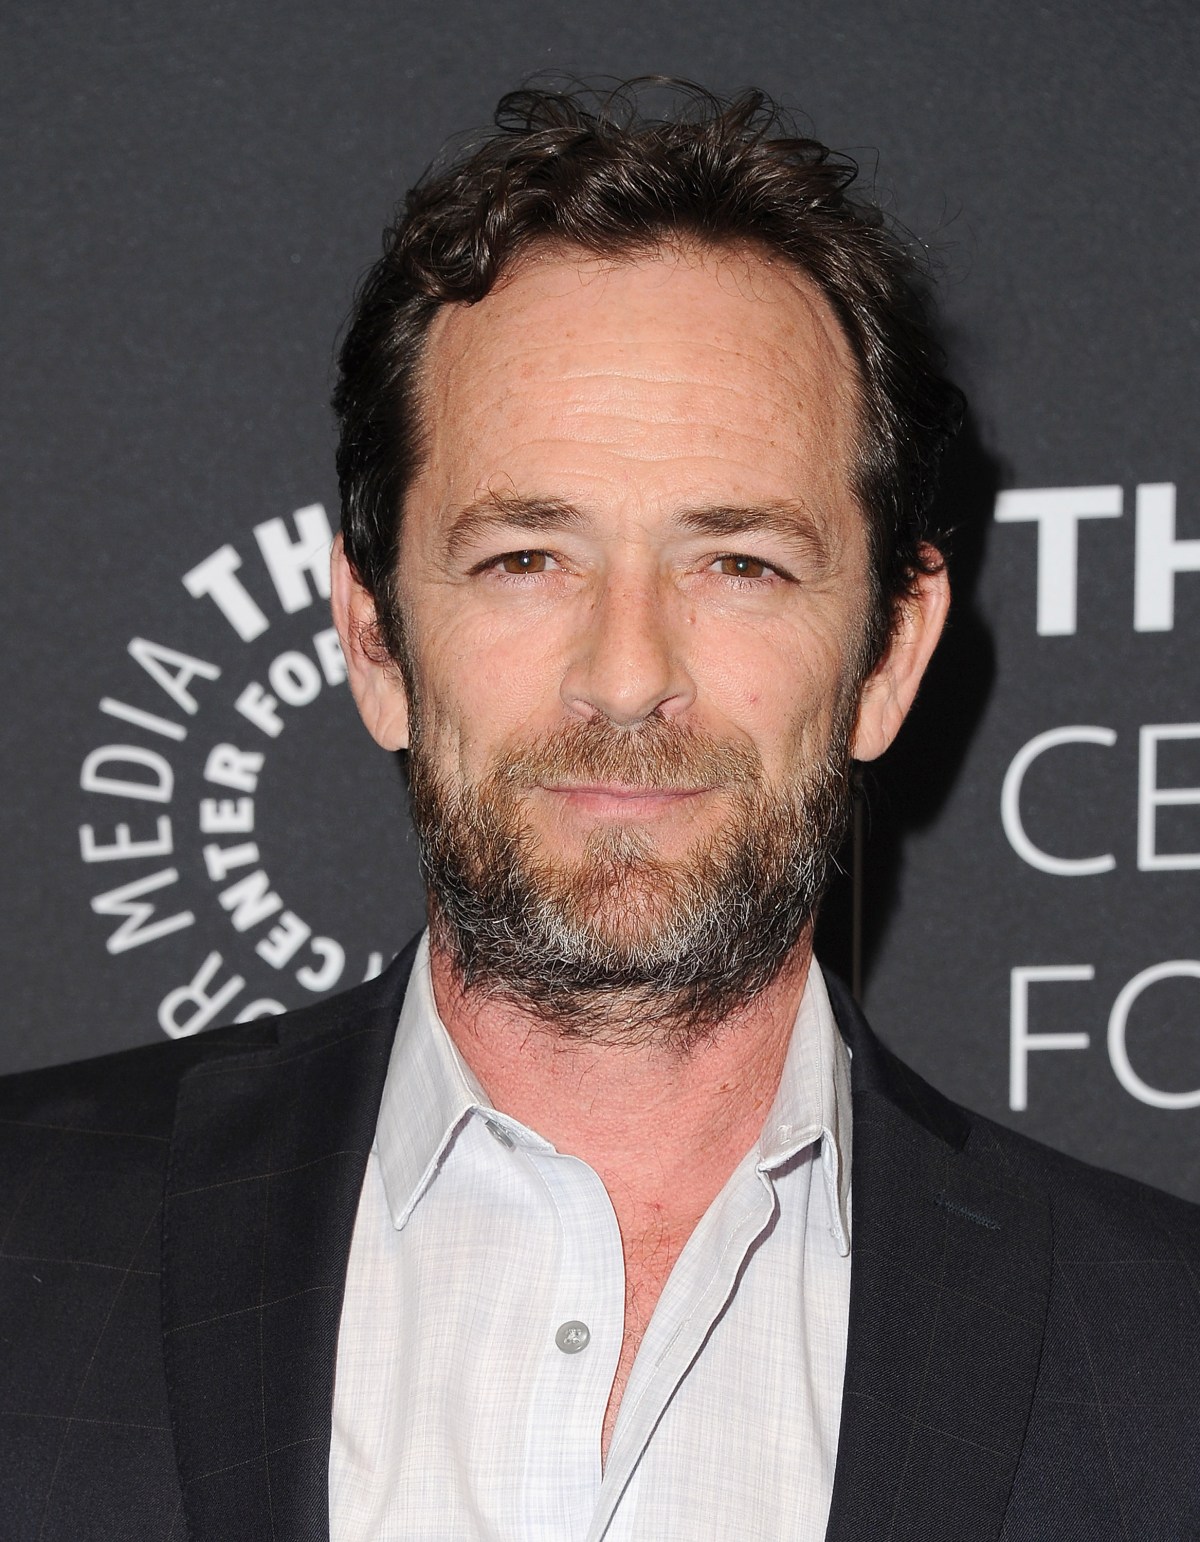 Luke Perry Reflects on Life and Career Before Death in New Special